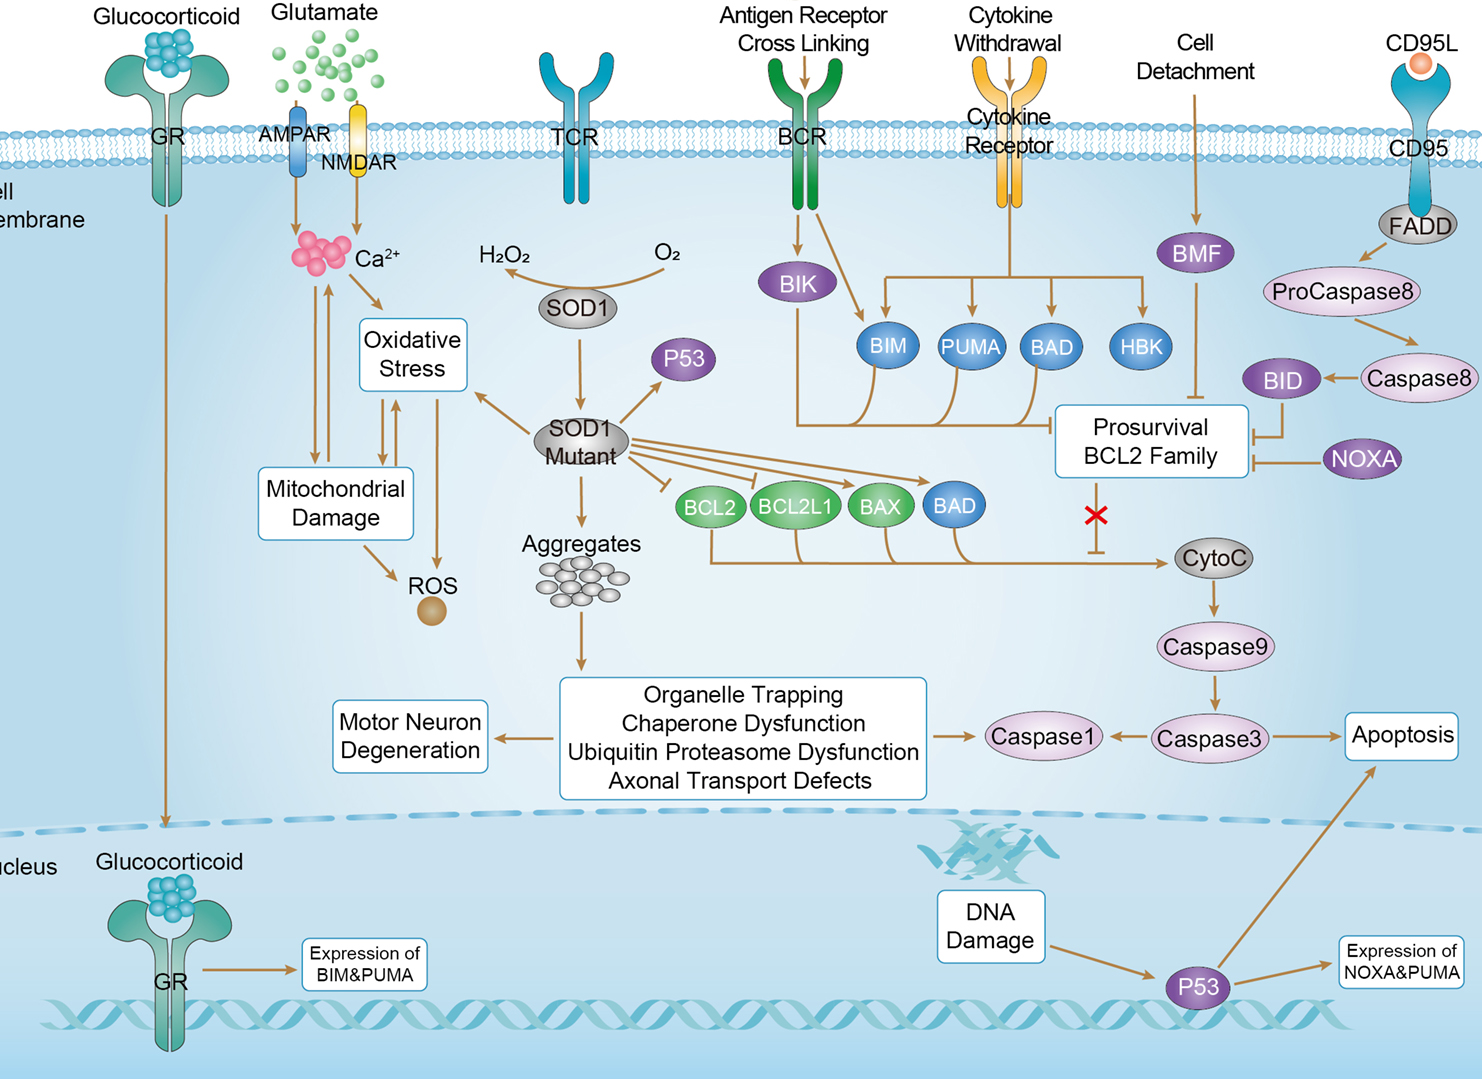 Amyotrophic lateral sclerosis Overview - Pathways, Diagnosis, Targeted Therapies